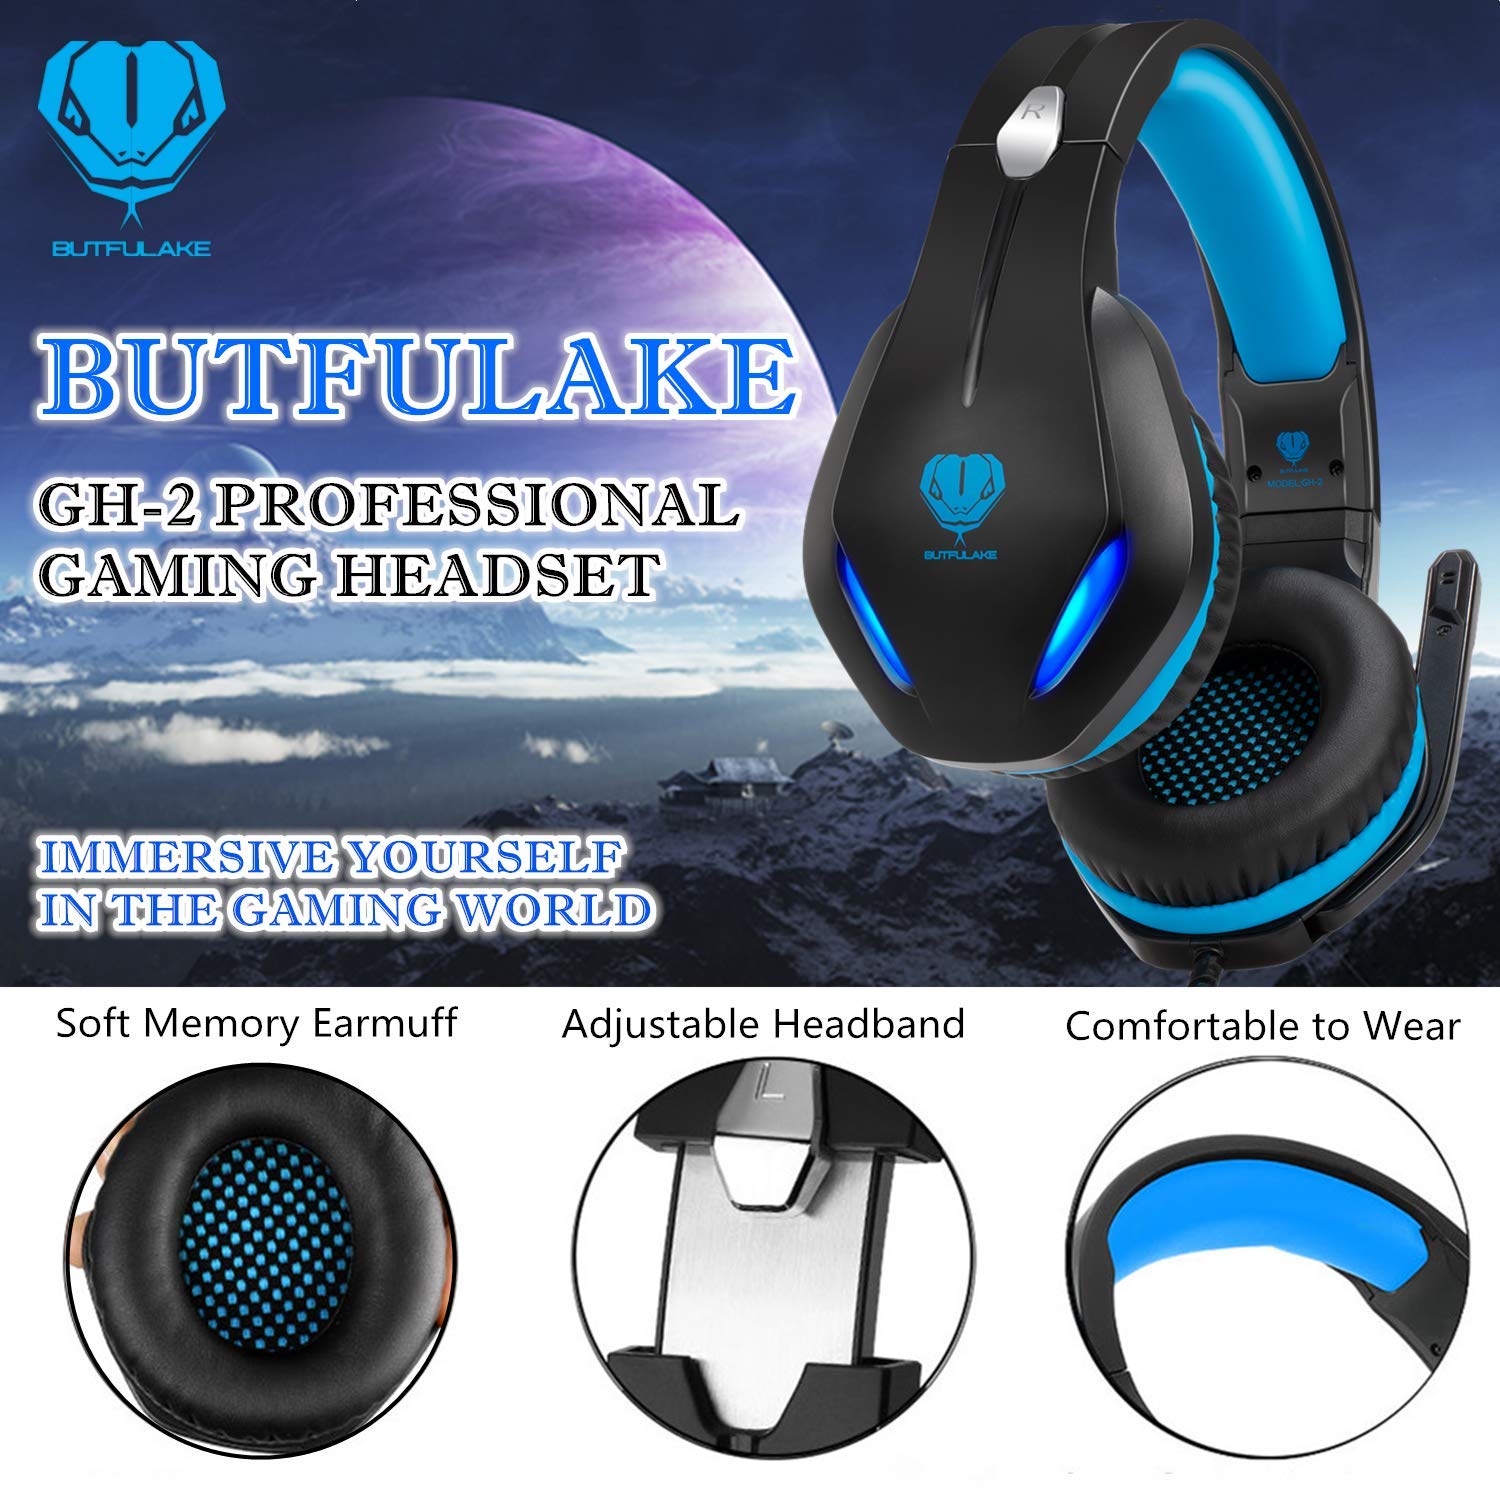 Headsets for Xbox One, PS4, PC, Nintendo Switch, Mac, Gaming Headset with Stereo Surround Sound, Over Ear Gaming Headphones with Noise Canceling Mic, LED Light (Headsets for Xbox/Blue)